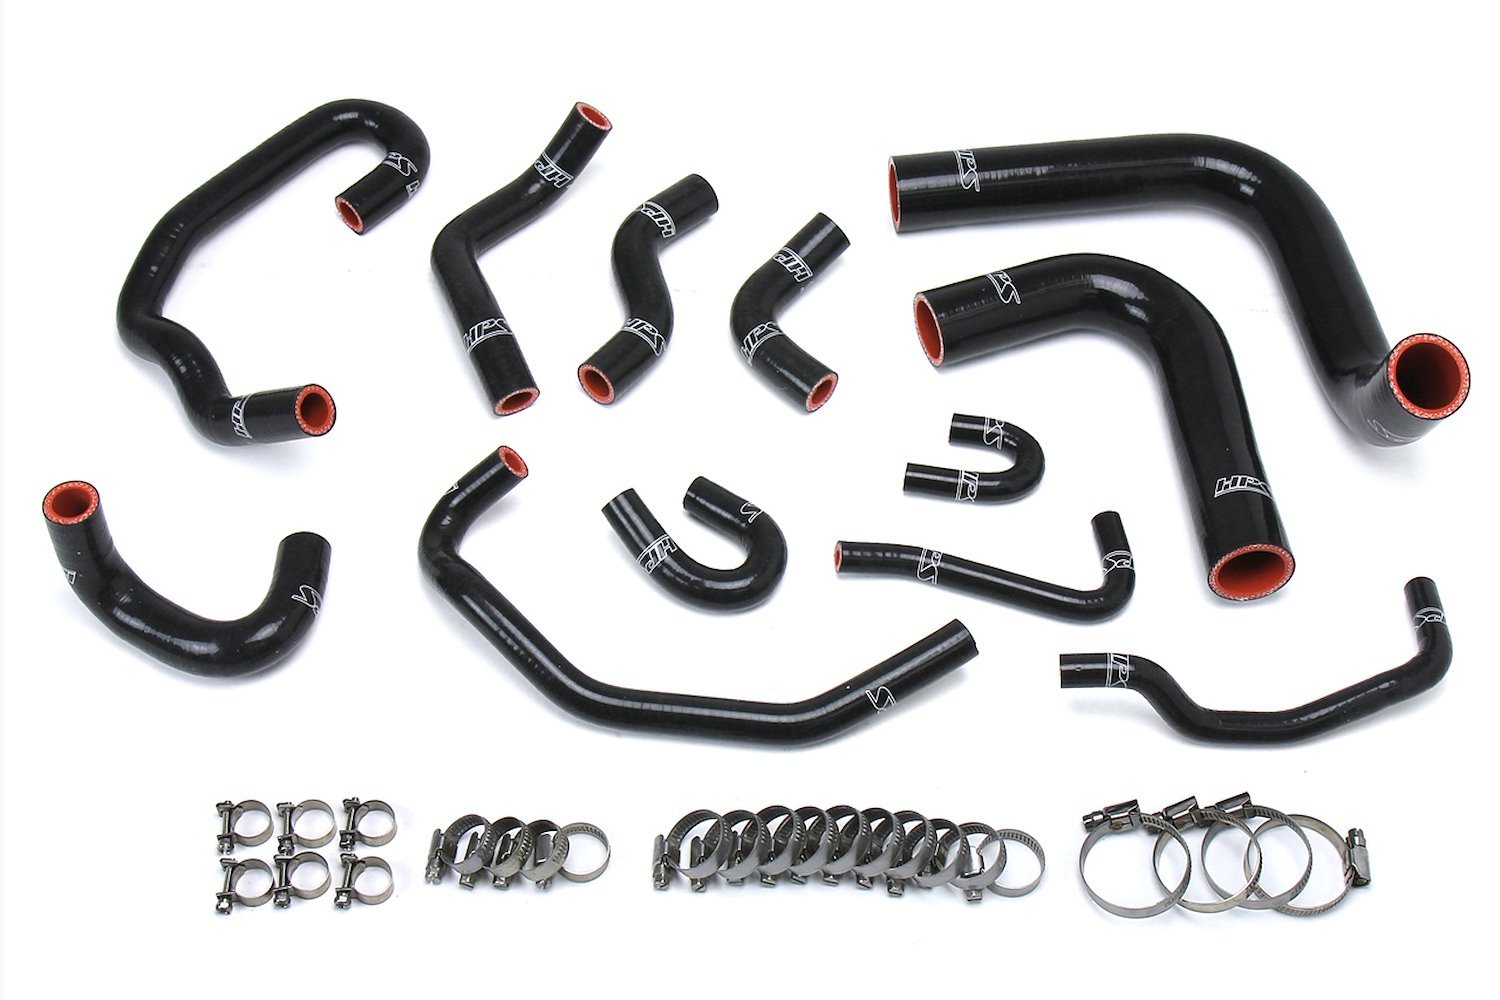 57-1654-BLK Coolant Hose Kit, High-Temp 3-Ply Reinforced Silicone, Replace Rubber Radiator Heater Coolant Hoses